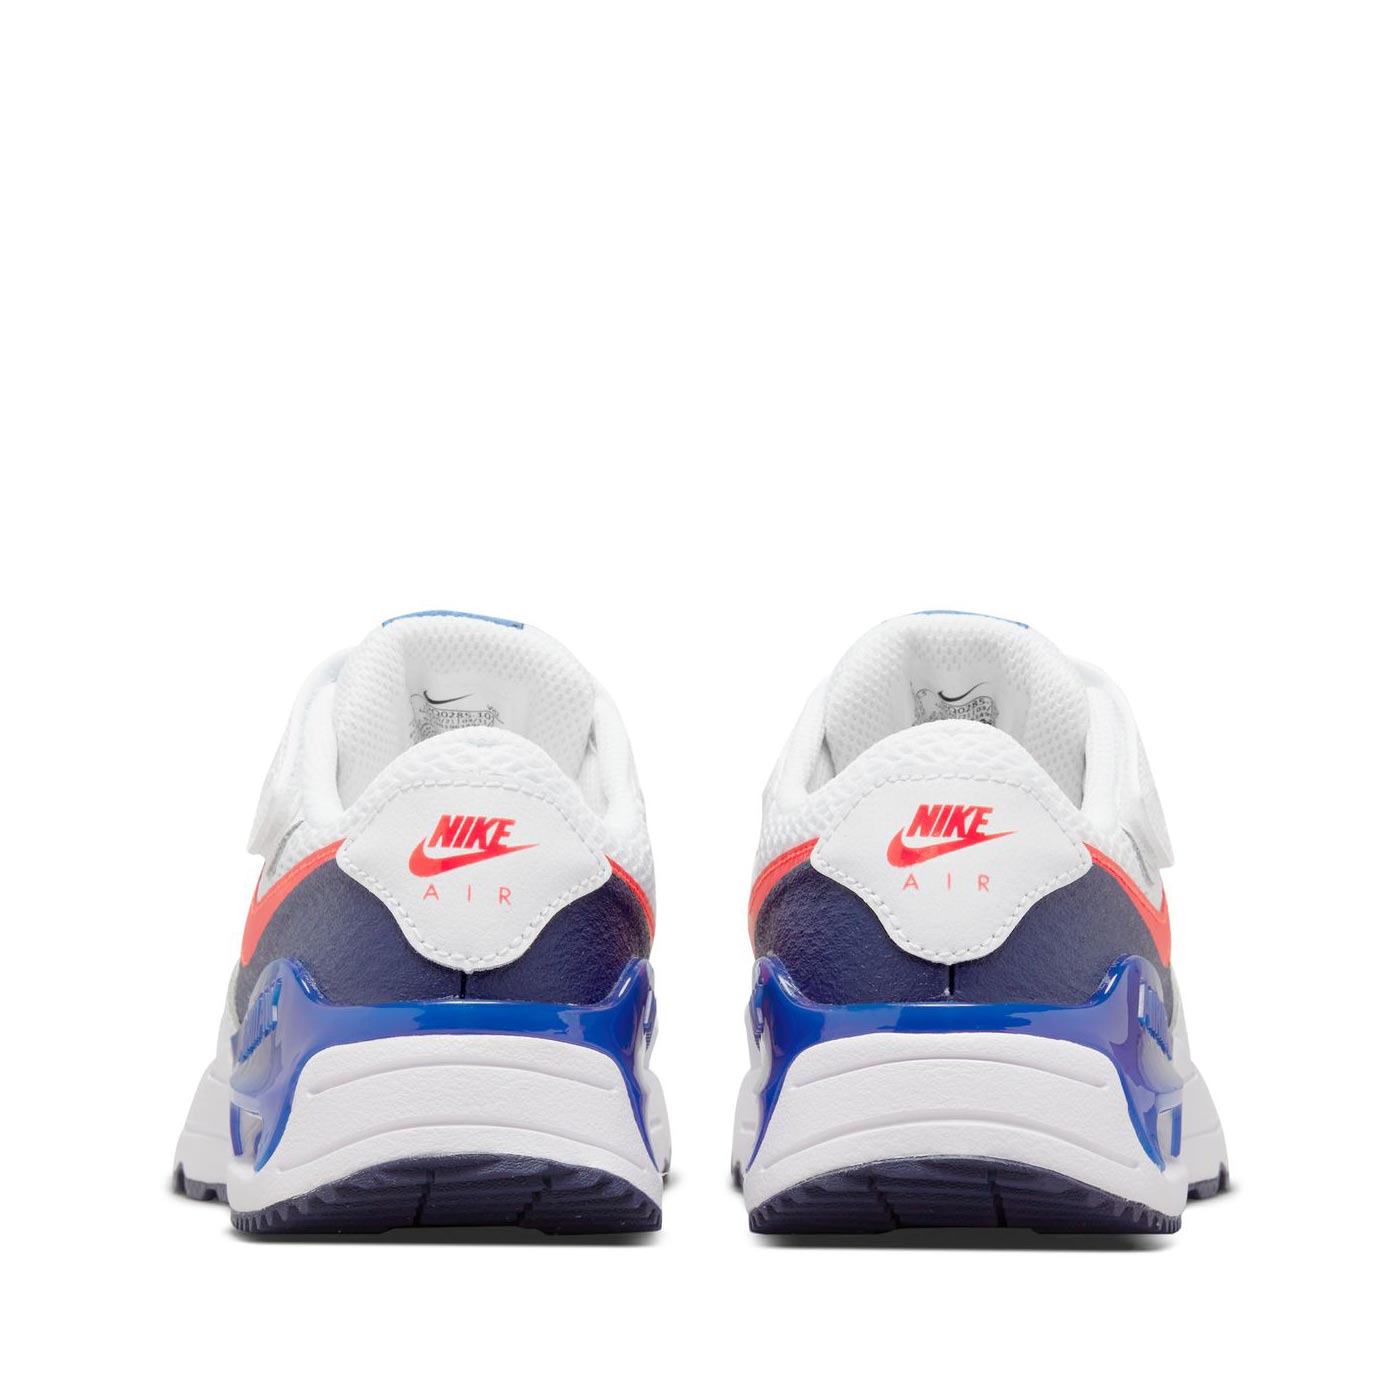 NIKE AIR MAX SYSTM JUNIOR KIDS SHOES